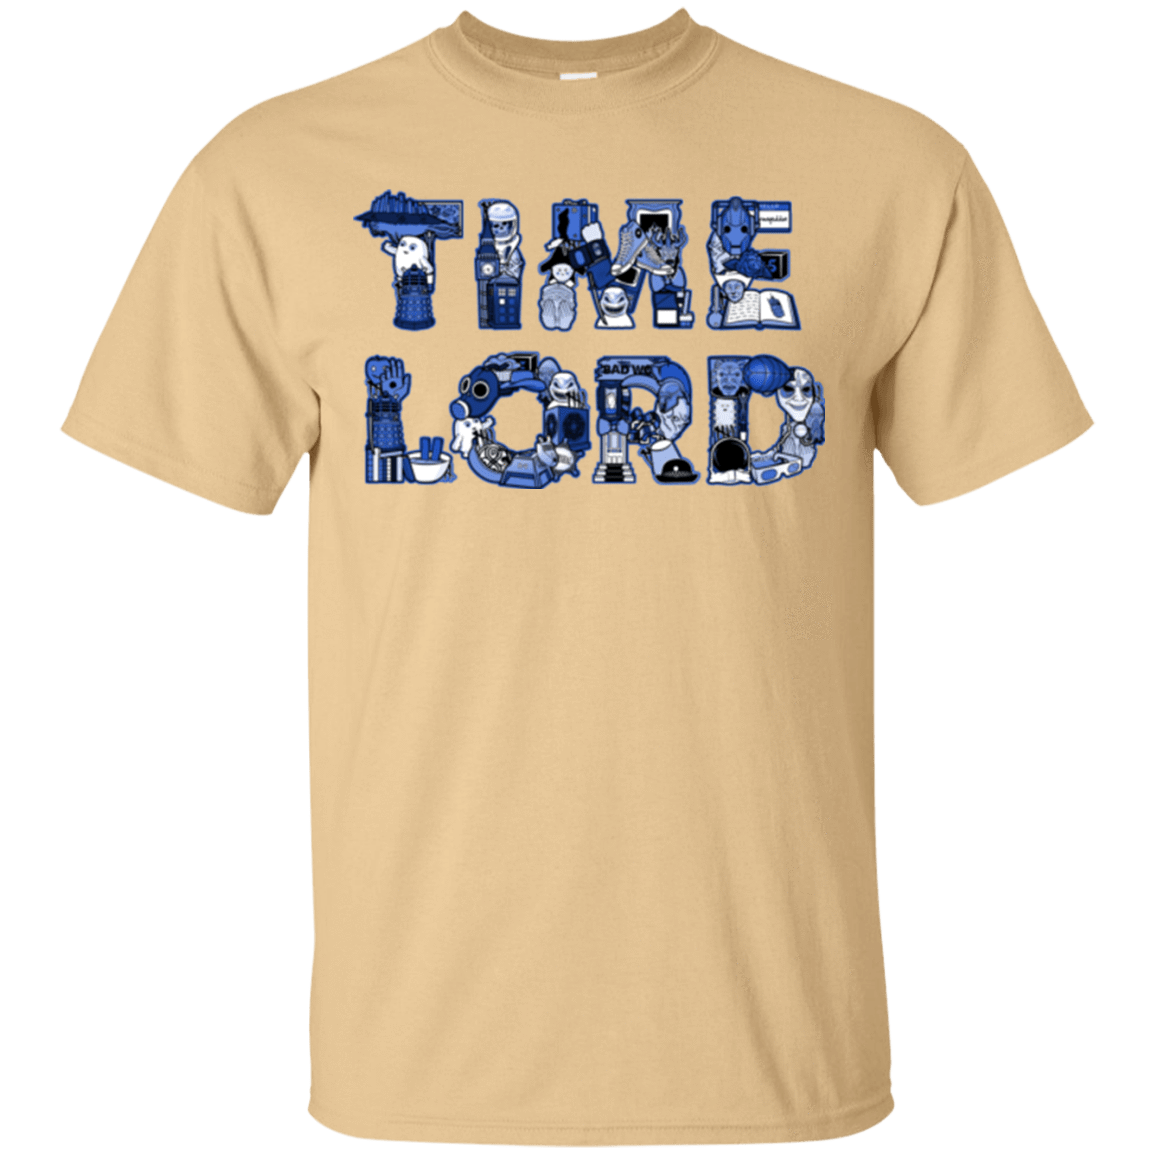 T-Shirts Vegas Gold / Small Timelord T-Shirt